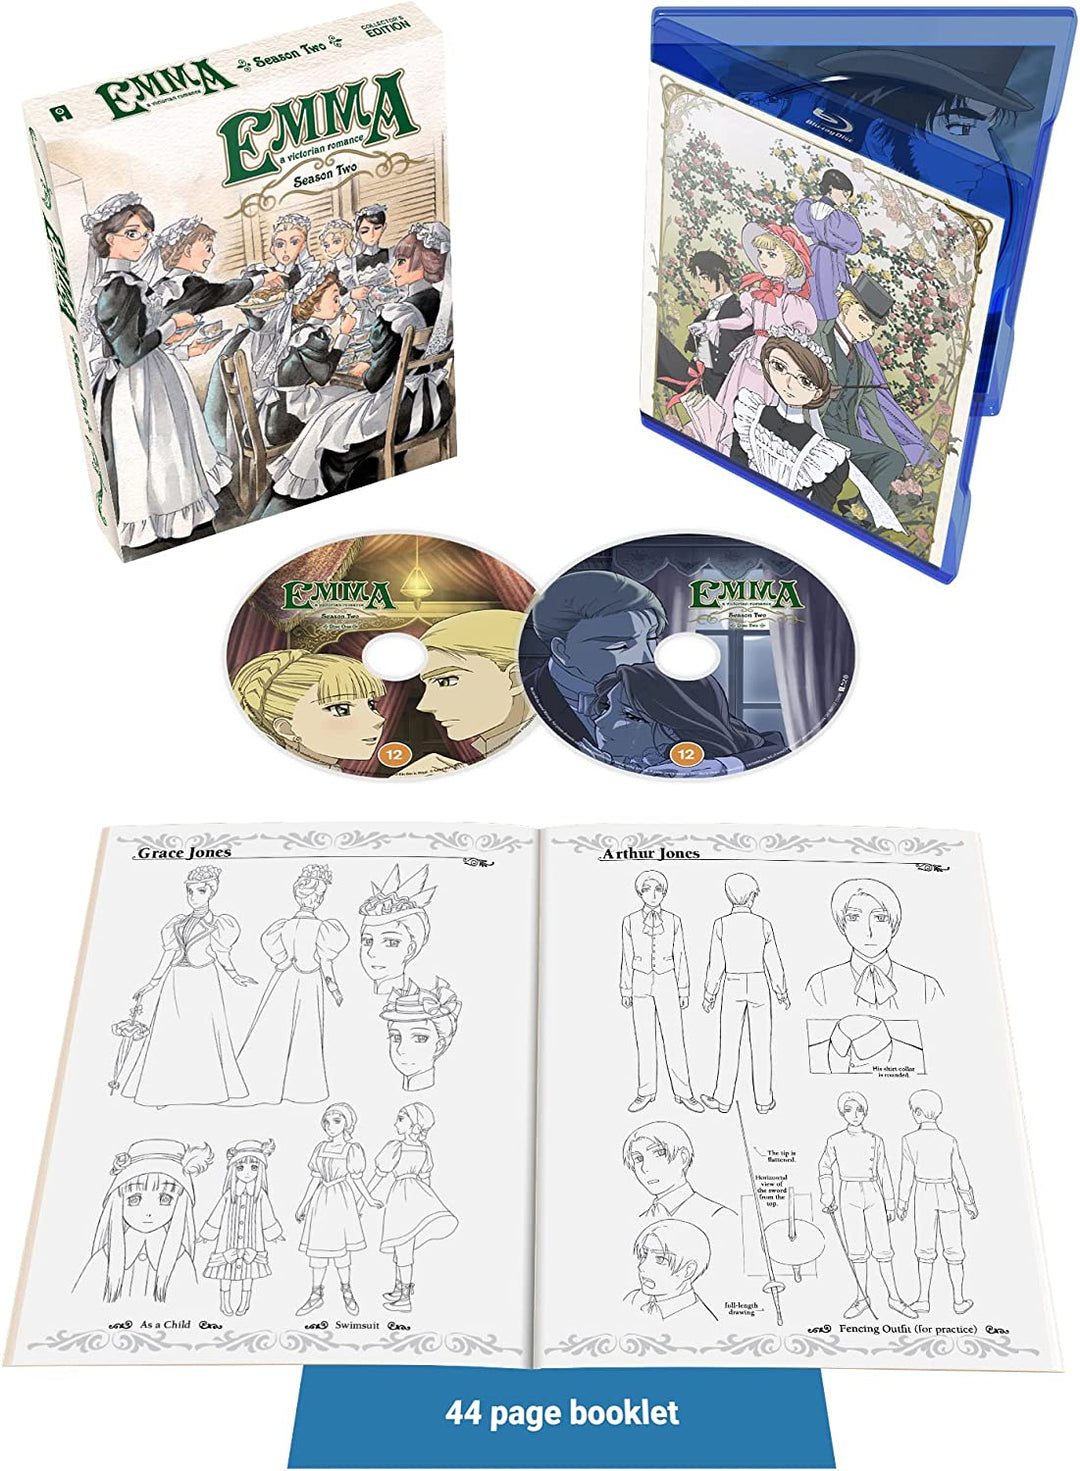 Emma: A Victorian Romance - Season Two (Collector's Limited Edition) [Blu-ray]